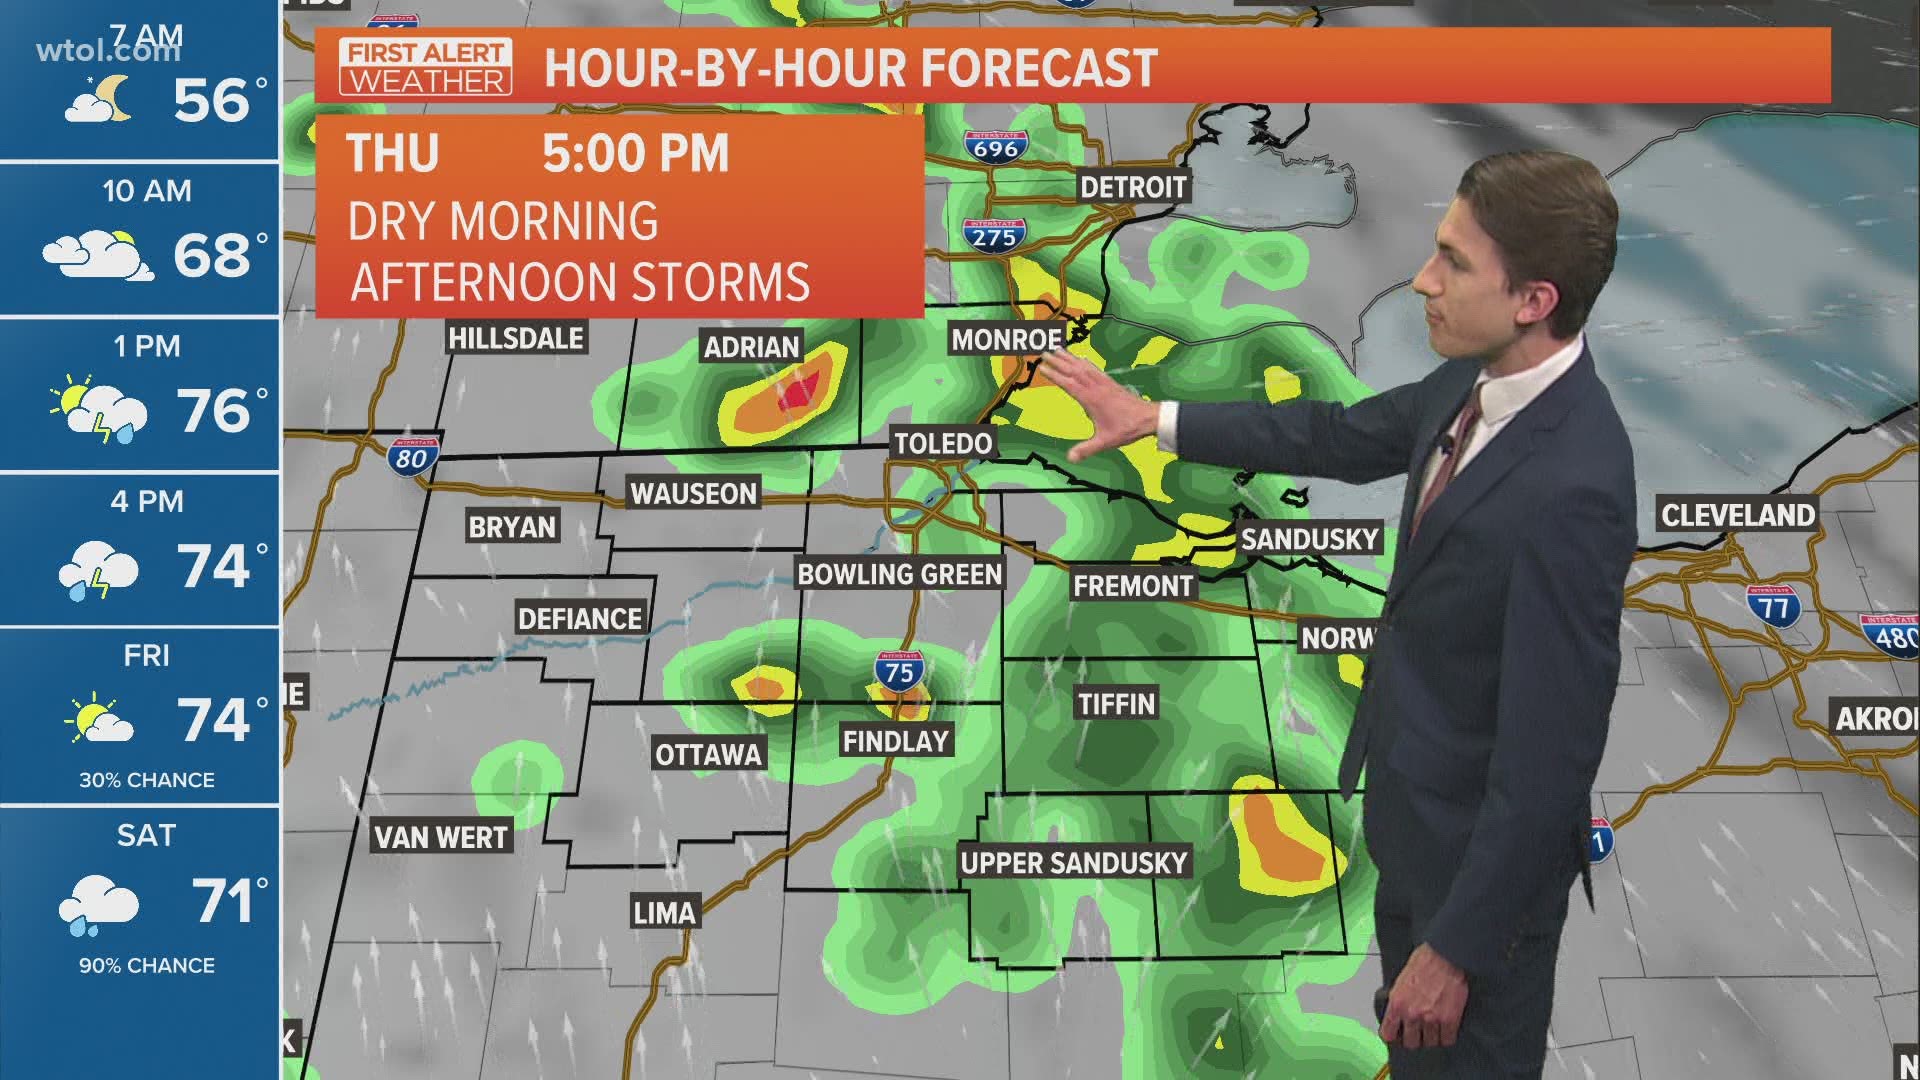 A strong storm or two can't be ruled out for tomorrow and more rain possible this weekend.